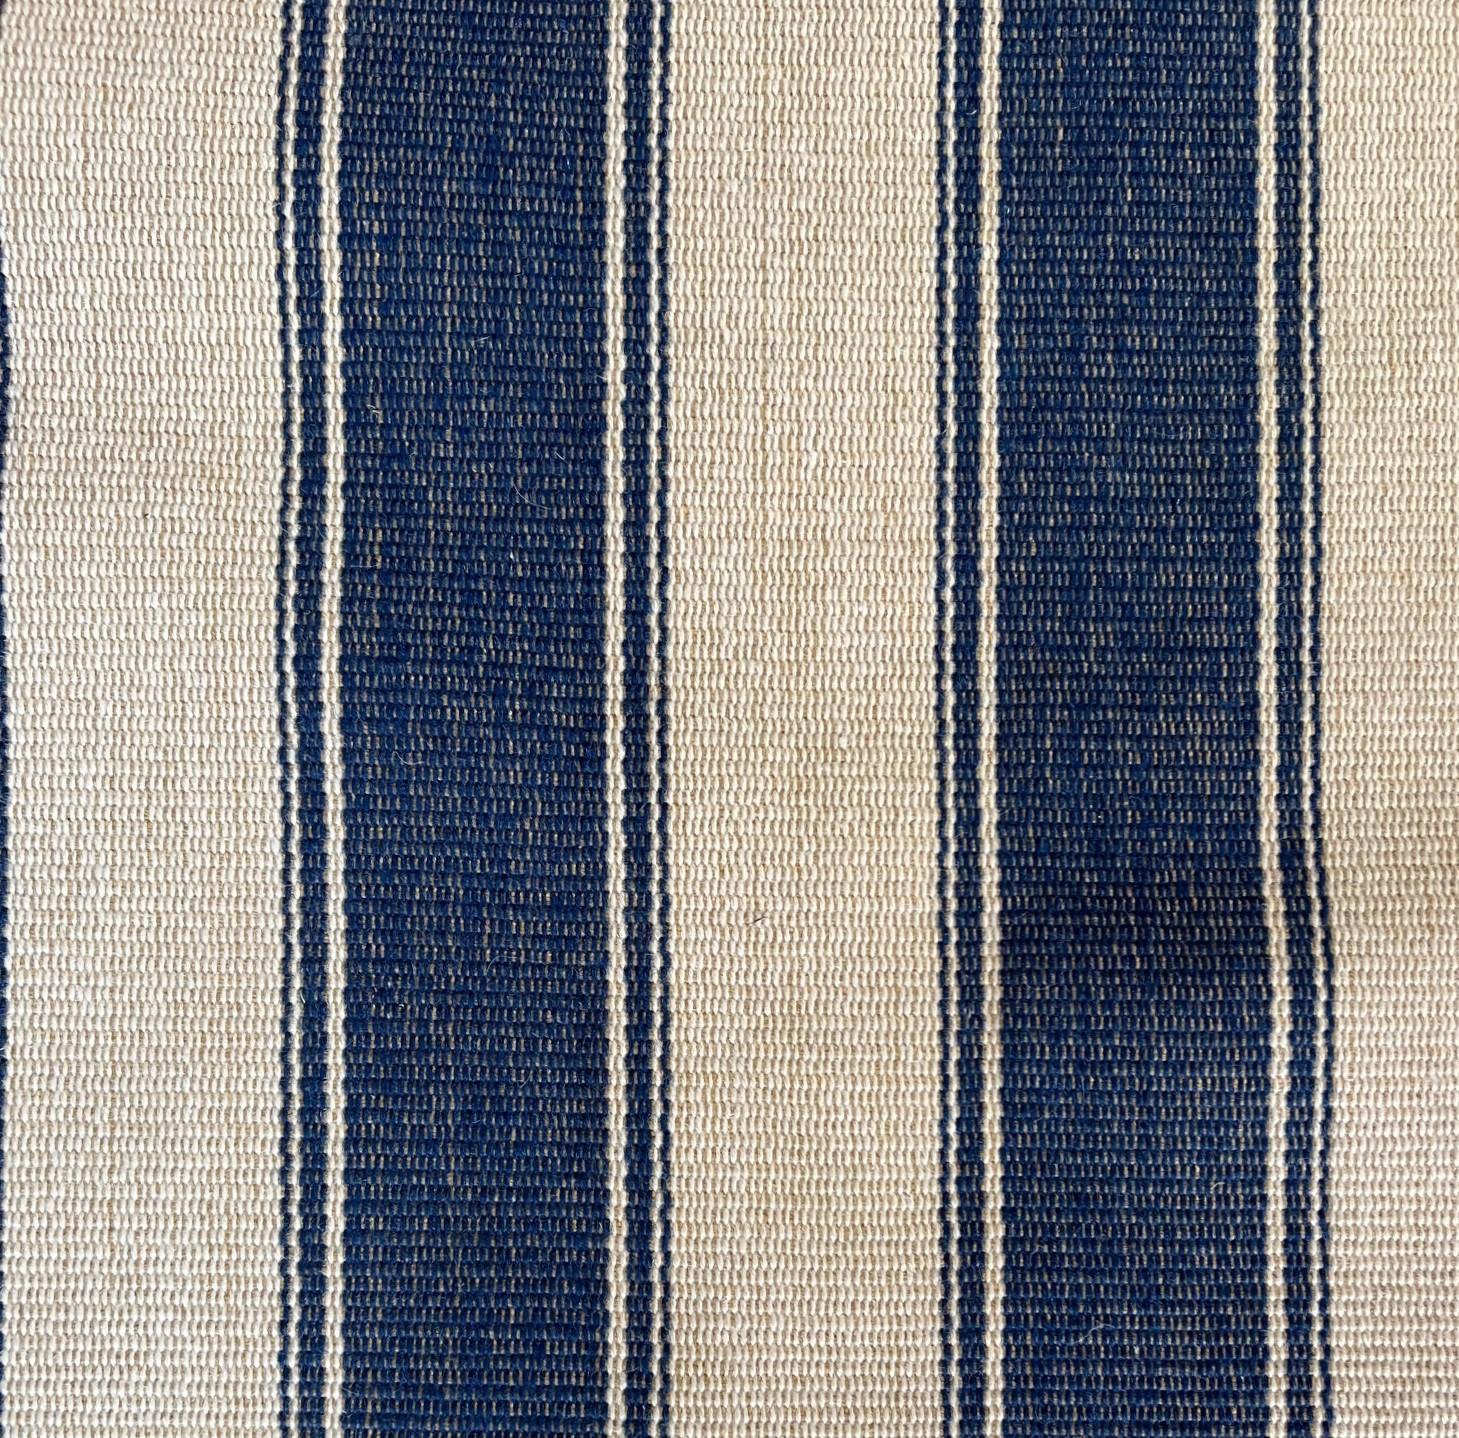 A striking modern custom striped area rug with faux leather edging and brass accents. This blue and light beige floor covering certainly makes a statement. The unexpected yet effective use of the edging studded with oversized brass nailhead trim